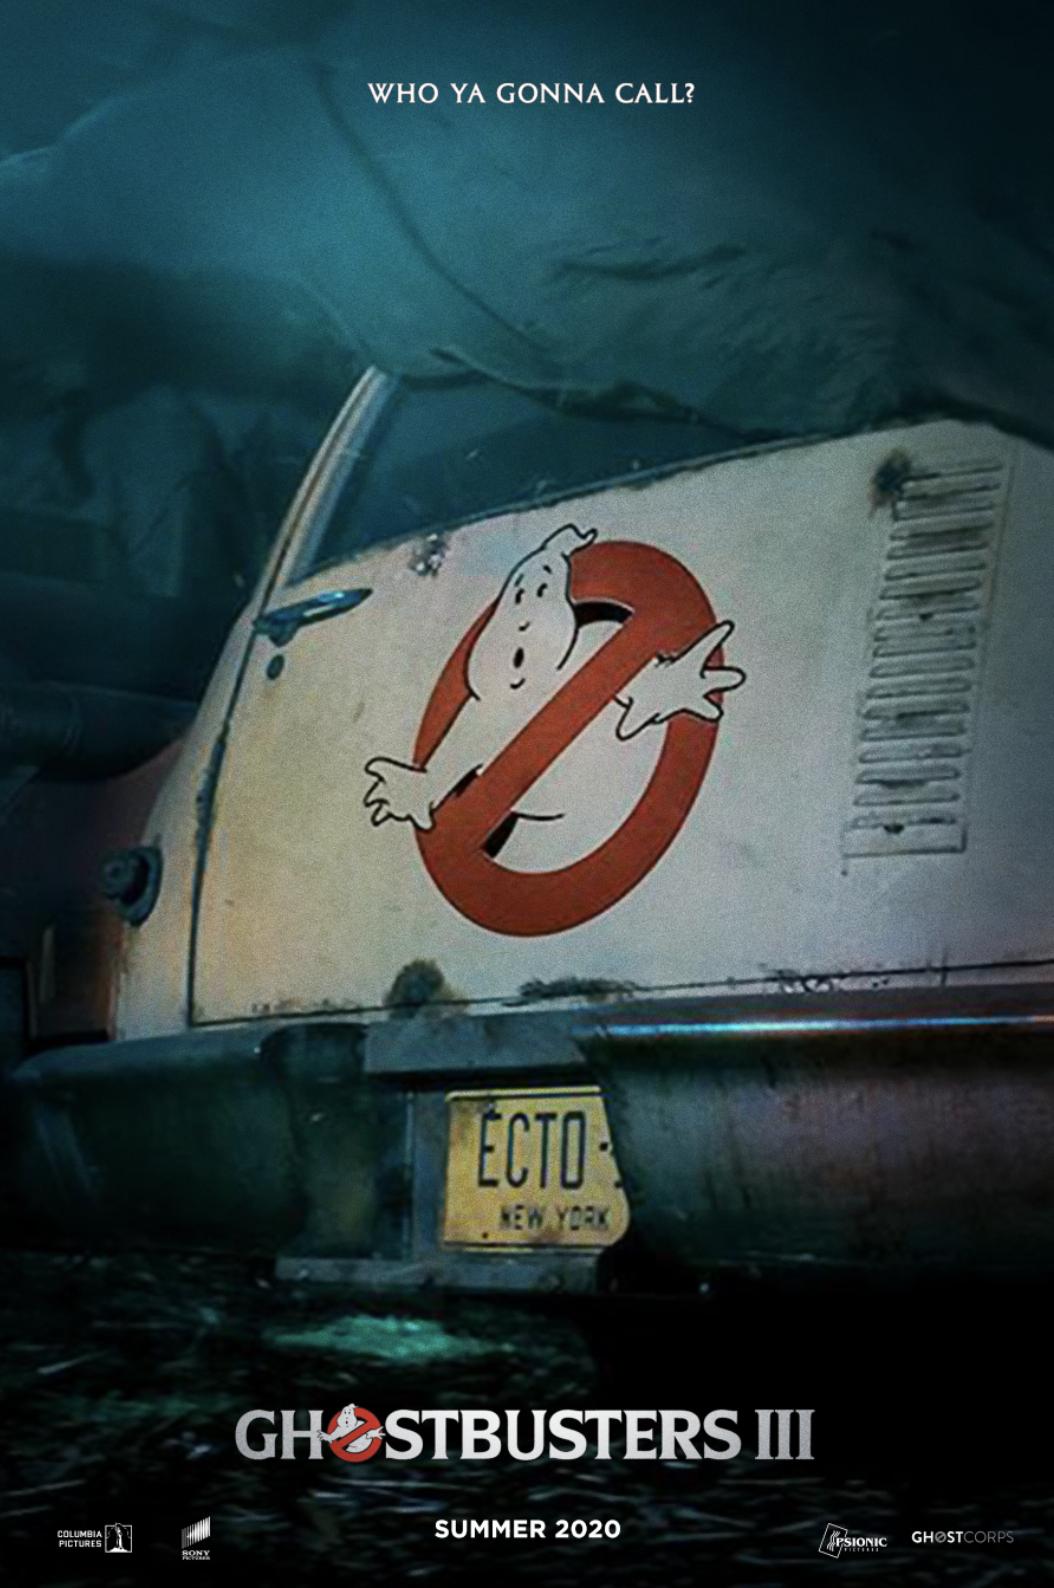 A New 'Ghostbusters' Movie Is Coming in 2020